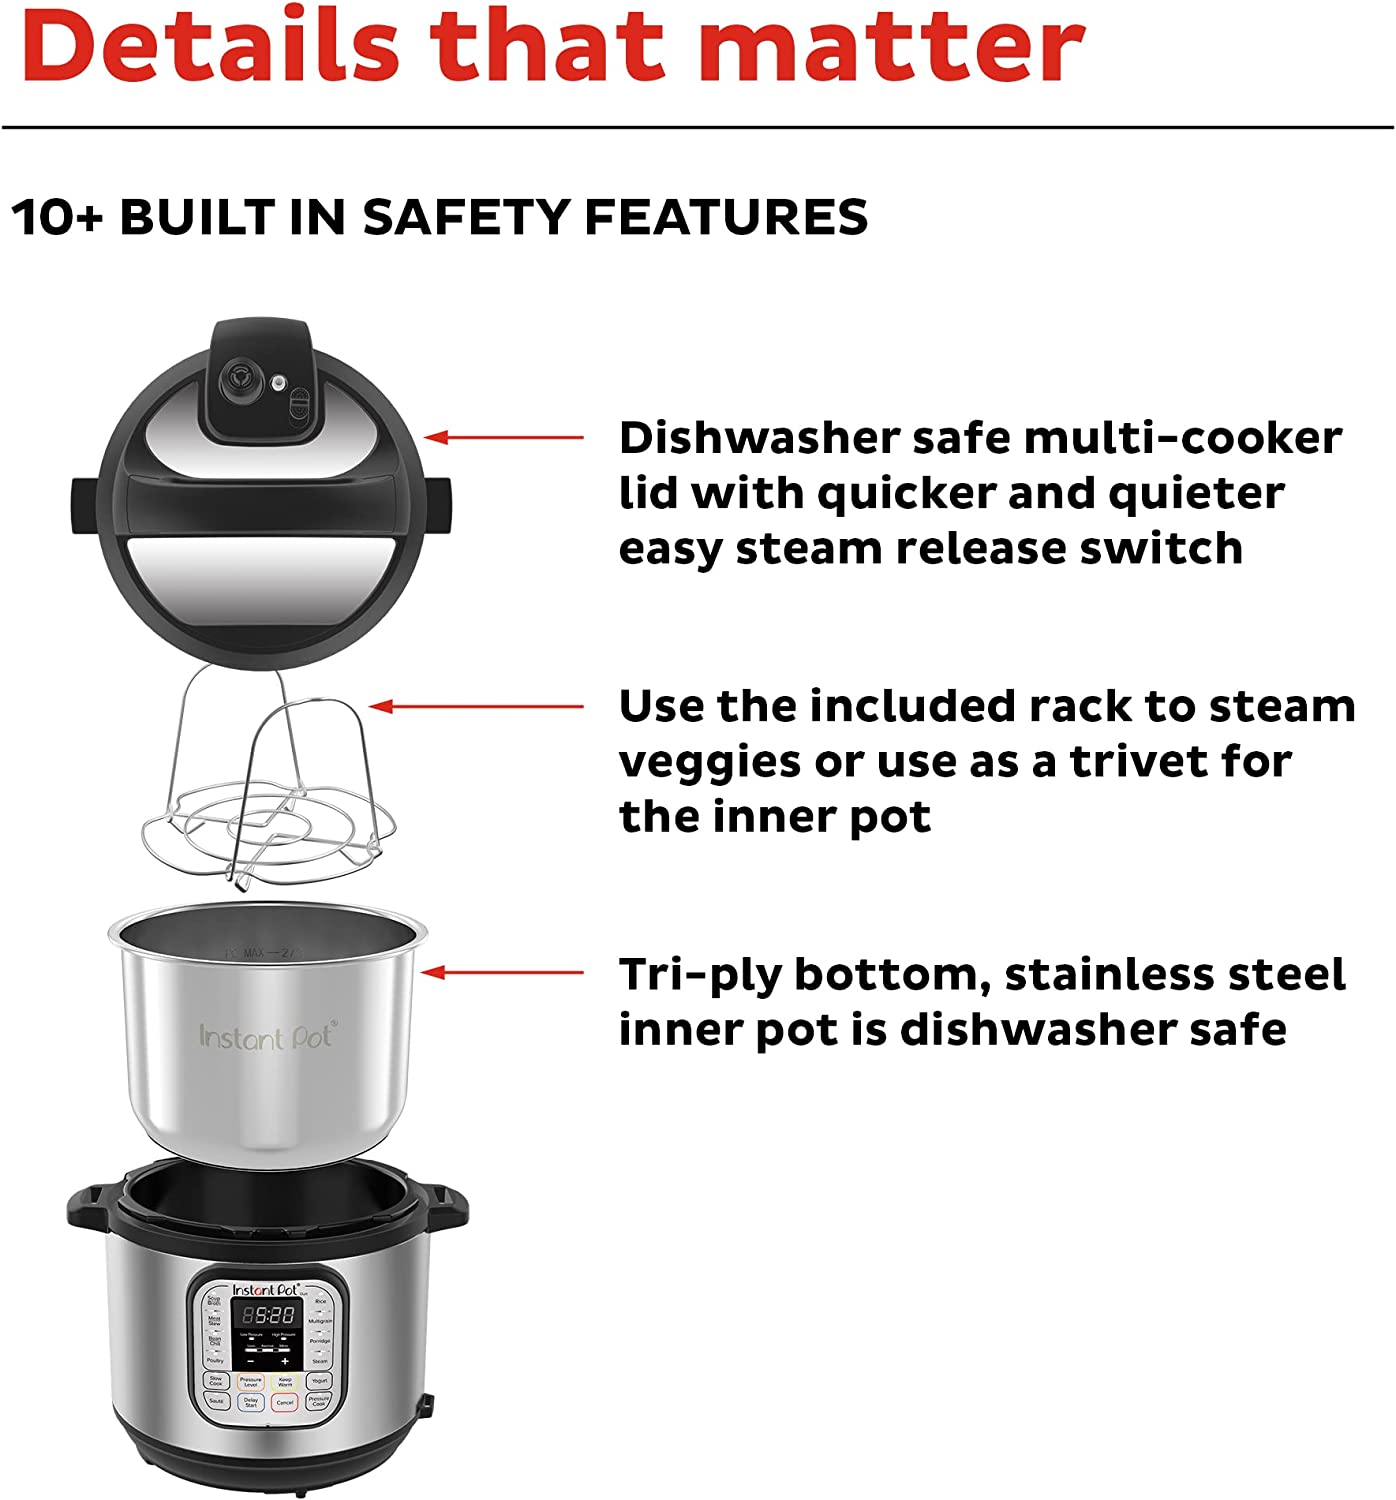 https://bigbigmart.com/wp-content/uploads/2023/07/Instant-Pot-Duo-7-in-1-Electric-Pressure-Cooker-Slow-Cooker-Rice-Cooker-Steamer-Saute-Yogurt-Maker-Warmer-Sterilizer-Includes-Free-App-with-over-1900-Recipes-Stainless-Steel-3-Quart4.jpg